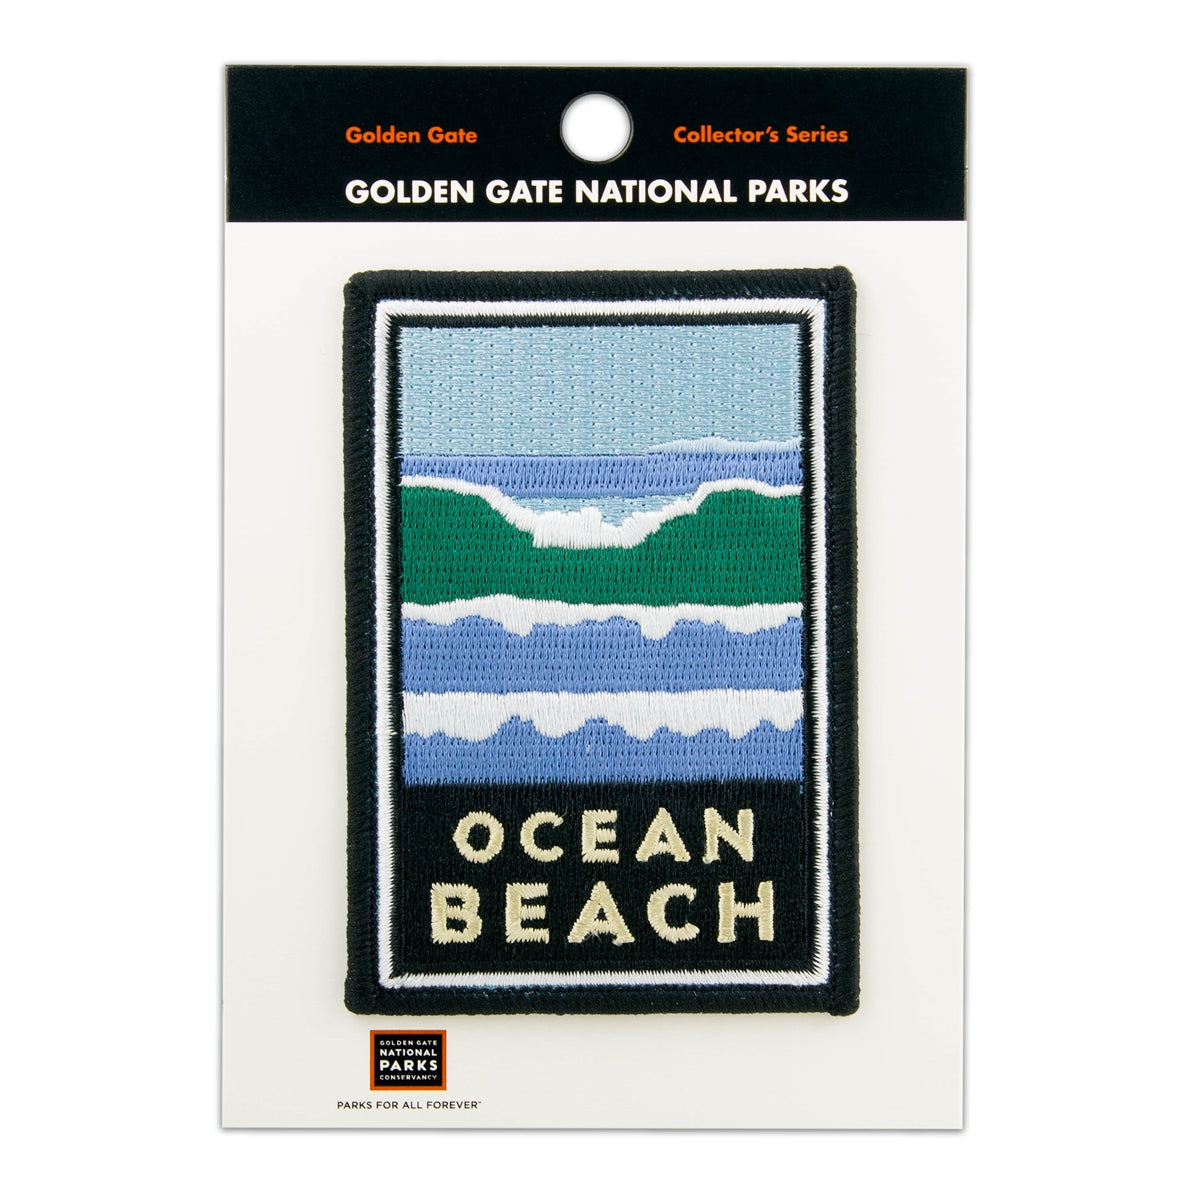 Multicolor embroidered patch featuring San Francisco Ocean Beach design, based on artwork by Michael Schwab.